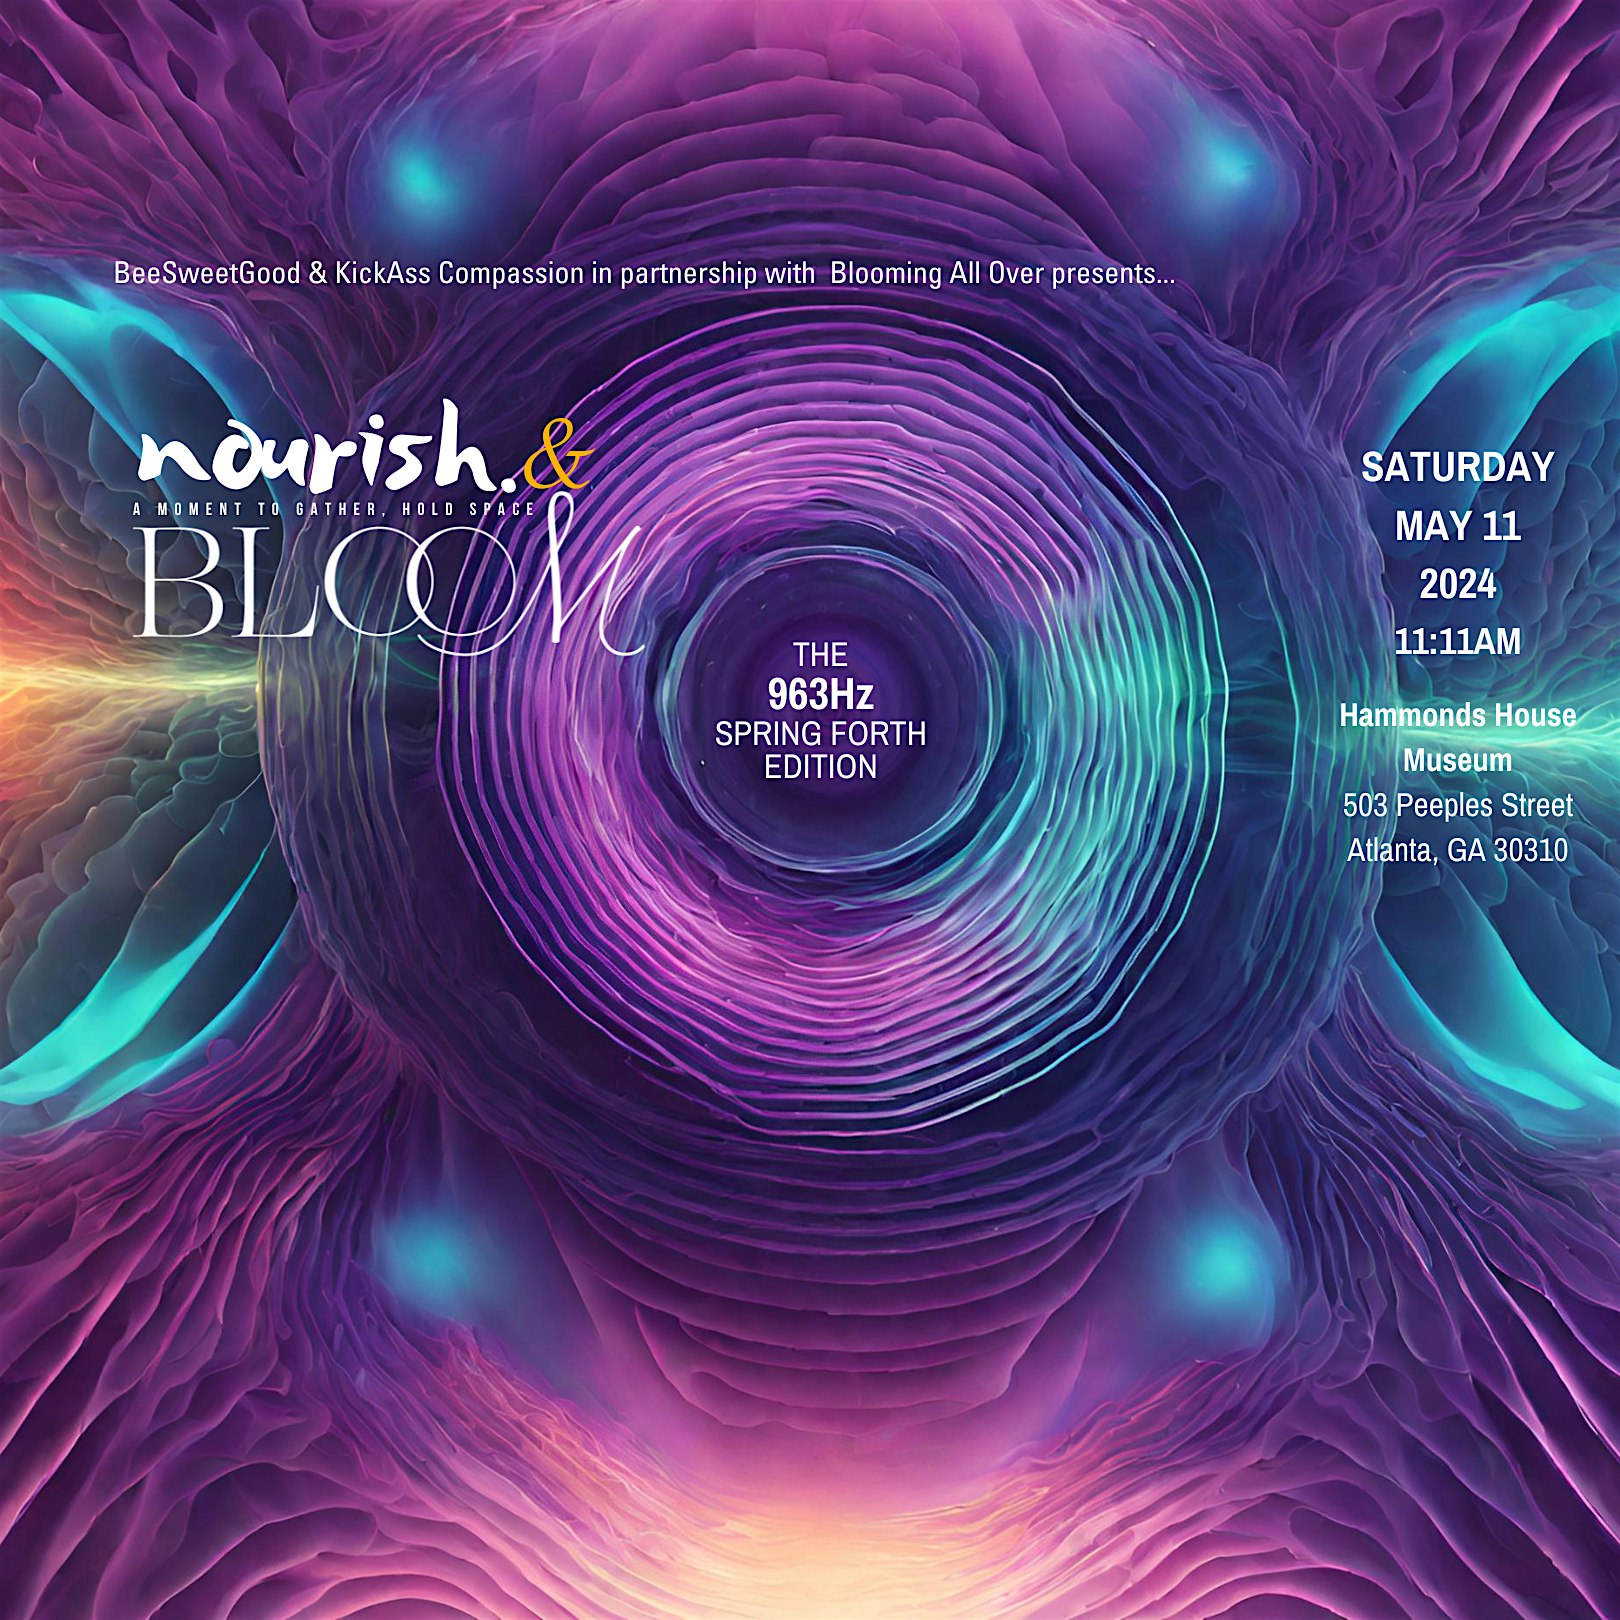 NOURISH & BLOOM:  a moment to gather, hold space and bloom\/ Exploring 963Hz